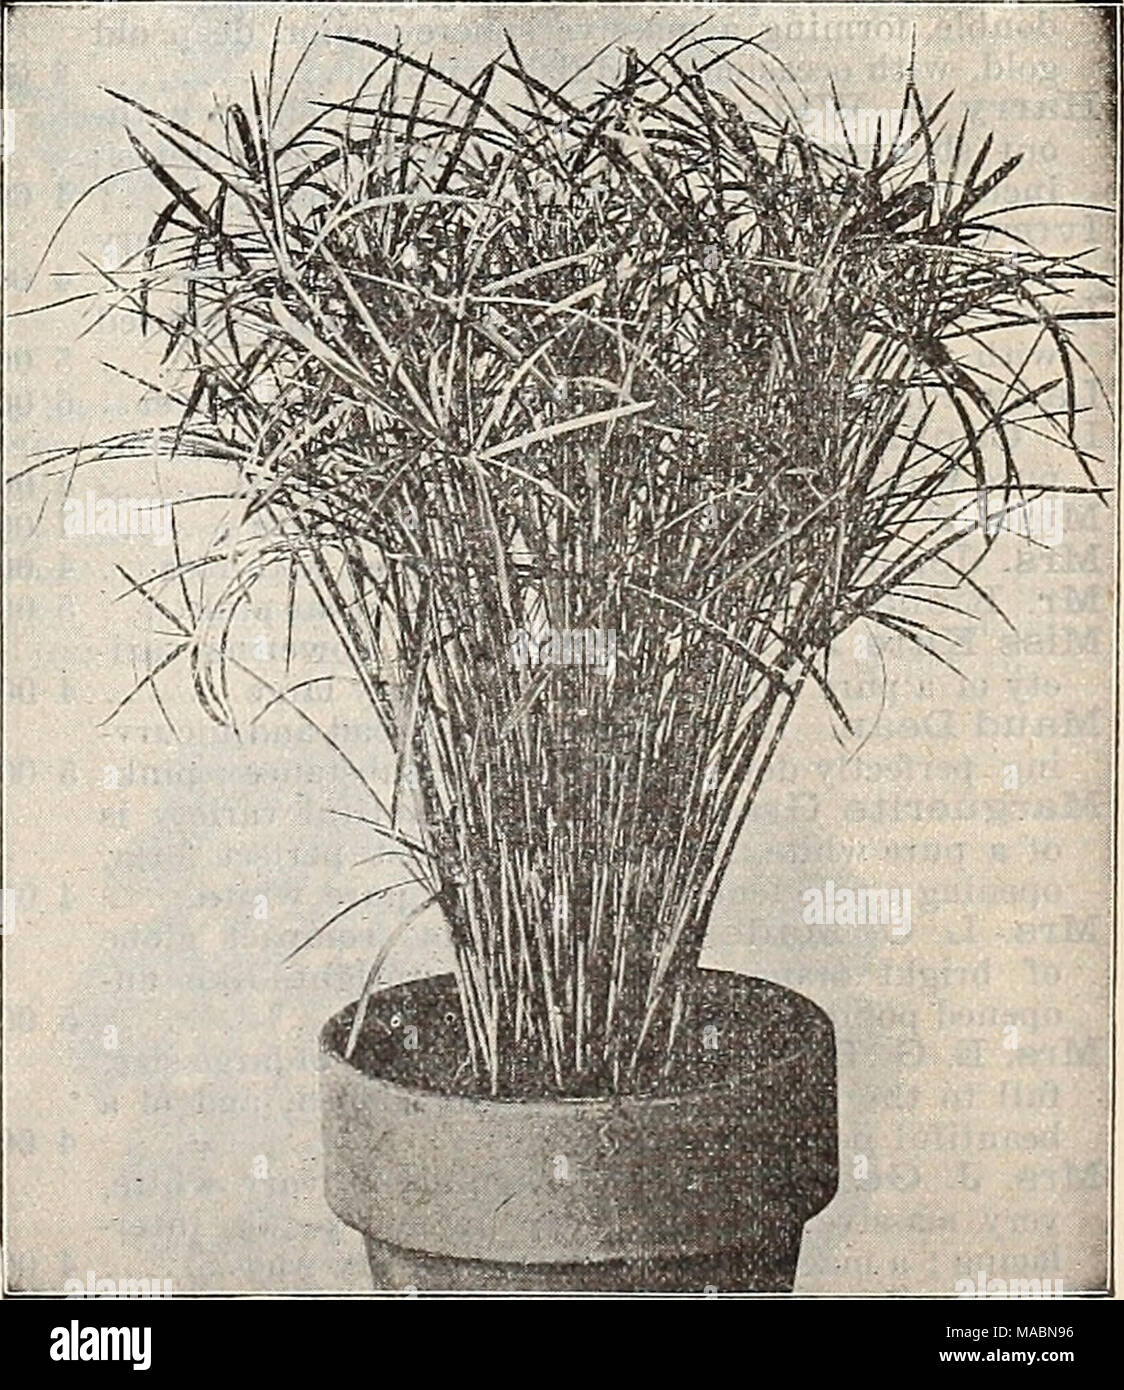 . Dreer's quarterly wholesale price list of seeds, plants &amp;c. : spring edition April 1896 June . Cyperus Alternifolius Gracilis. Cy per us Alter nifolia Gracilis. A pretty new variety of Cyperus with graceful narrow foliage, entirely distinct, which is certain to become very popular. 2h inch pots, $1.00 per dozen ; $8.00 per 100. Stock Photo